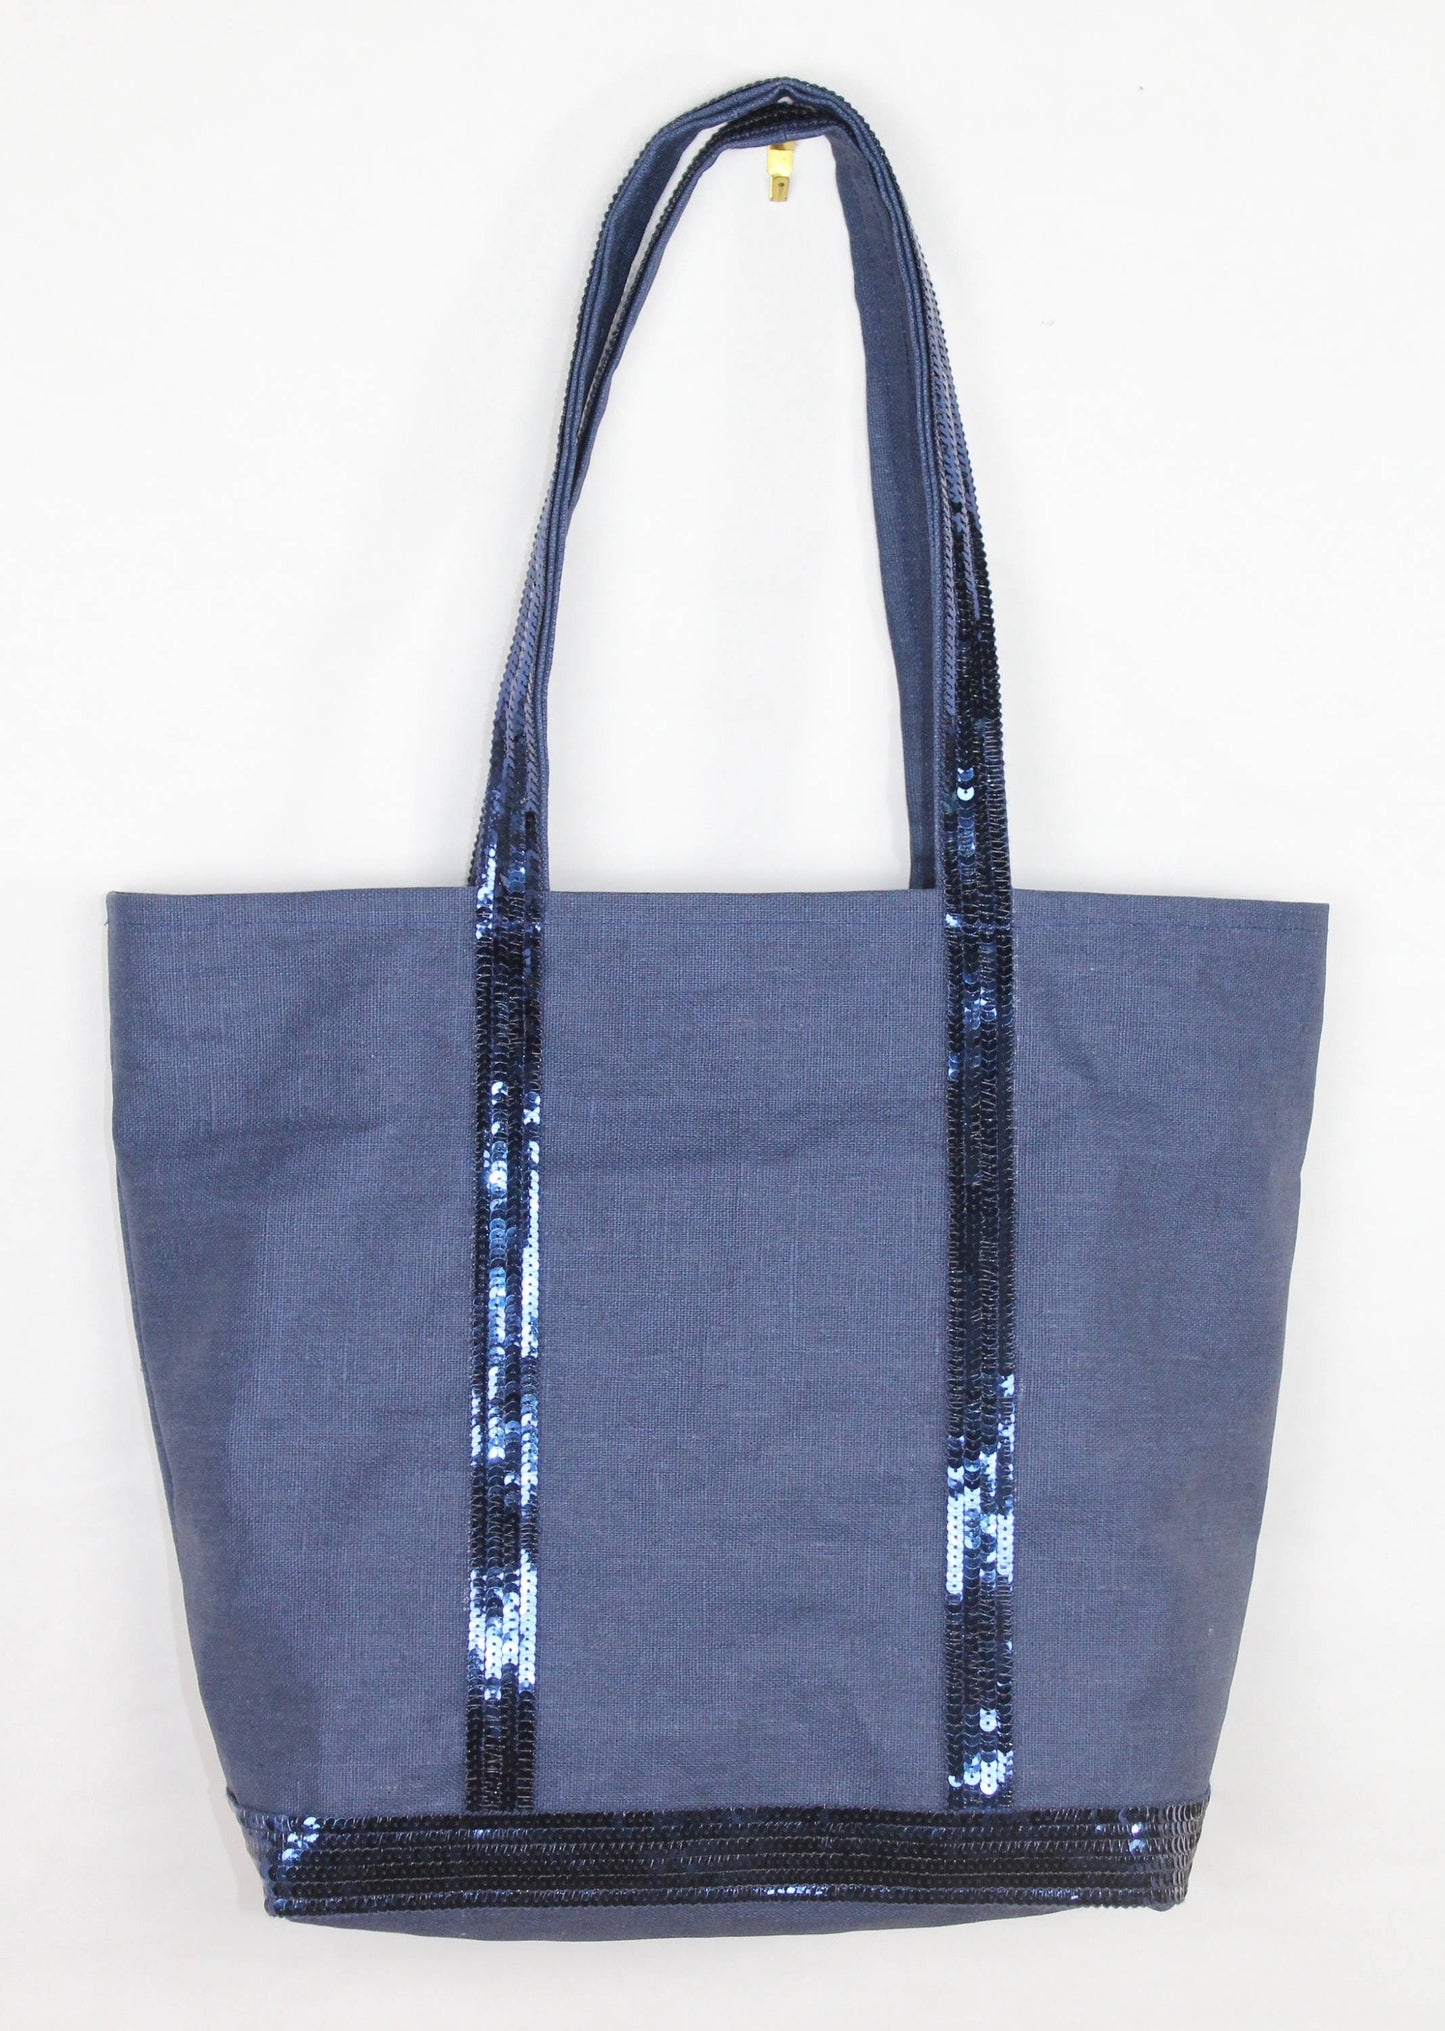 Navy blue coated linen tote bag with real navy blue sequins beach bag